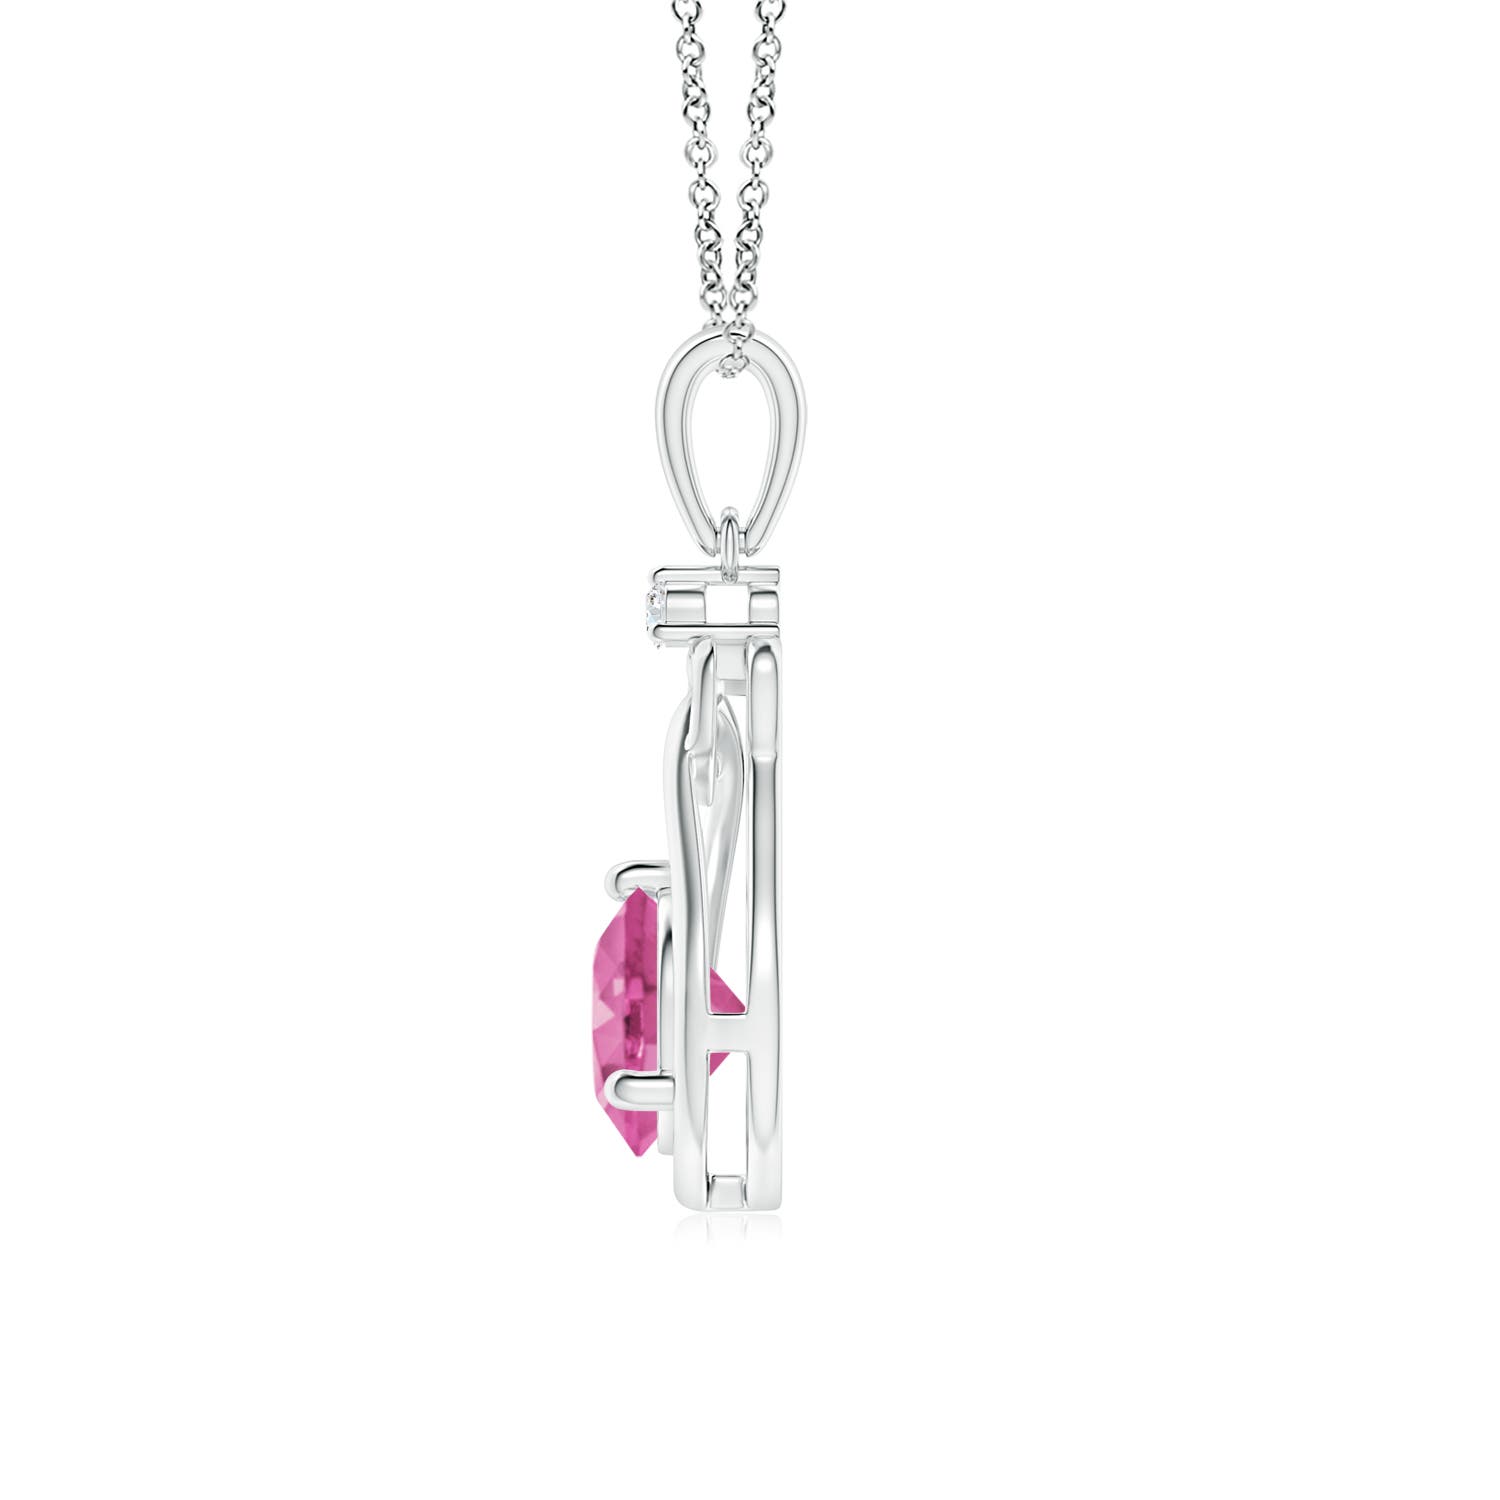 AAA - Pink Sapphire / 1.01 CT / 14 KT White Gold